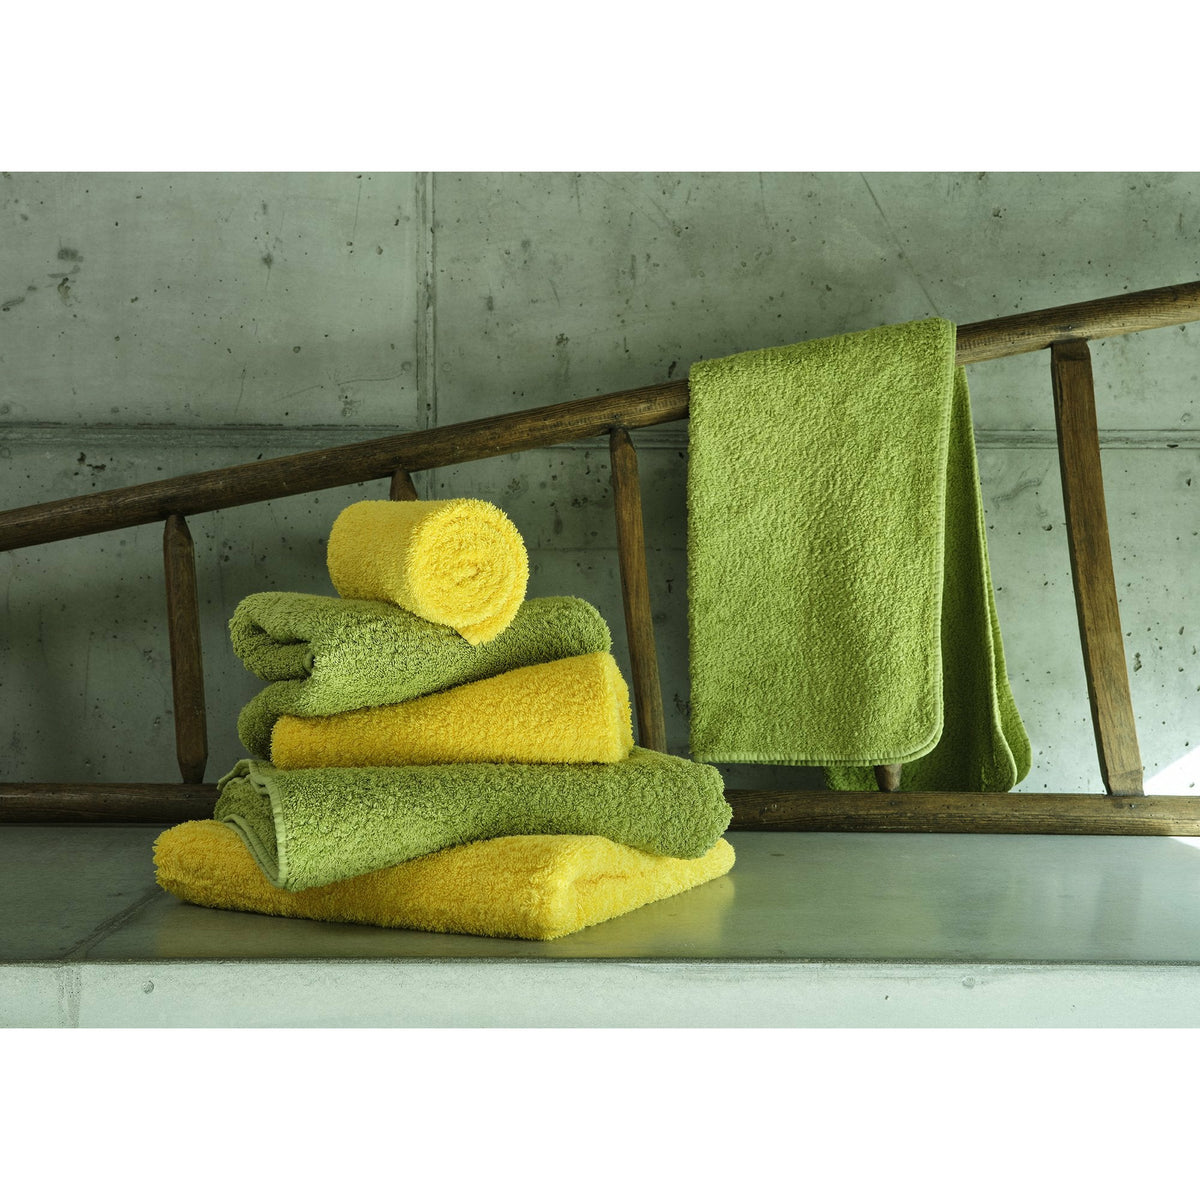 Abyss Super Pile Towels - Bath Towel 28x54 Lupin 430